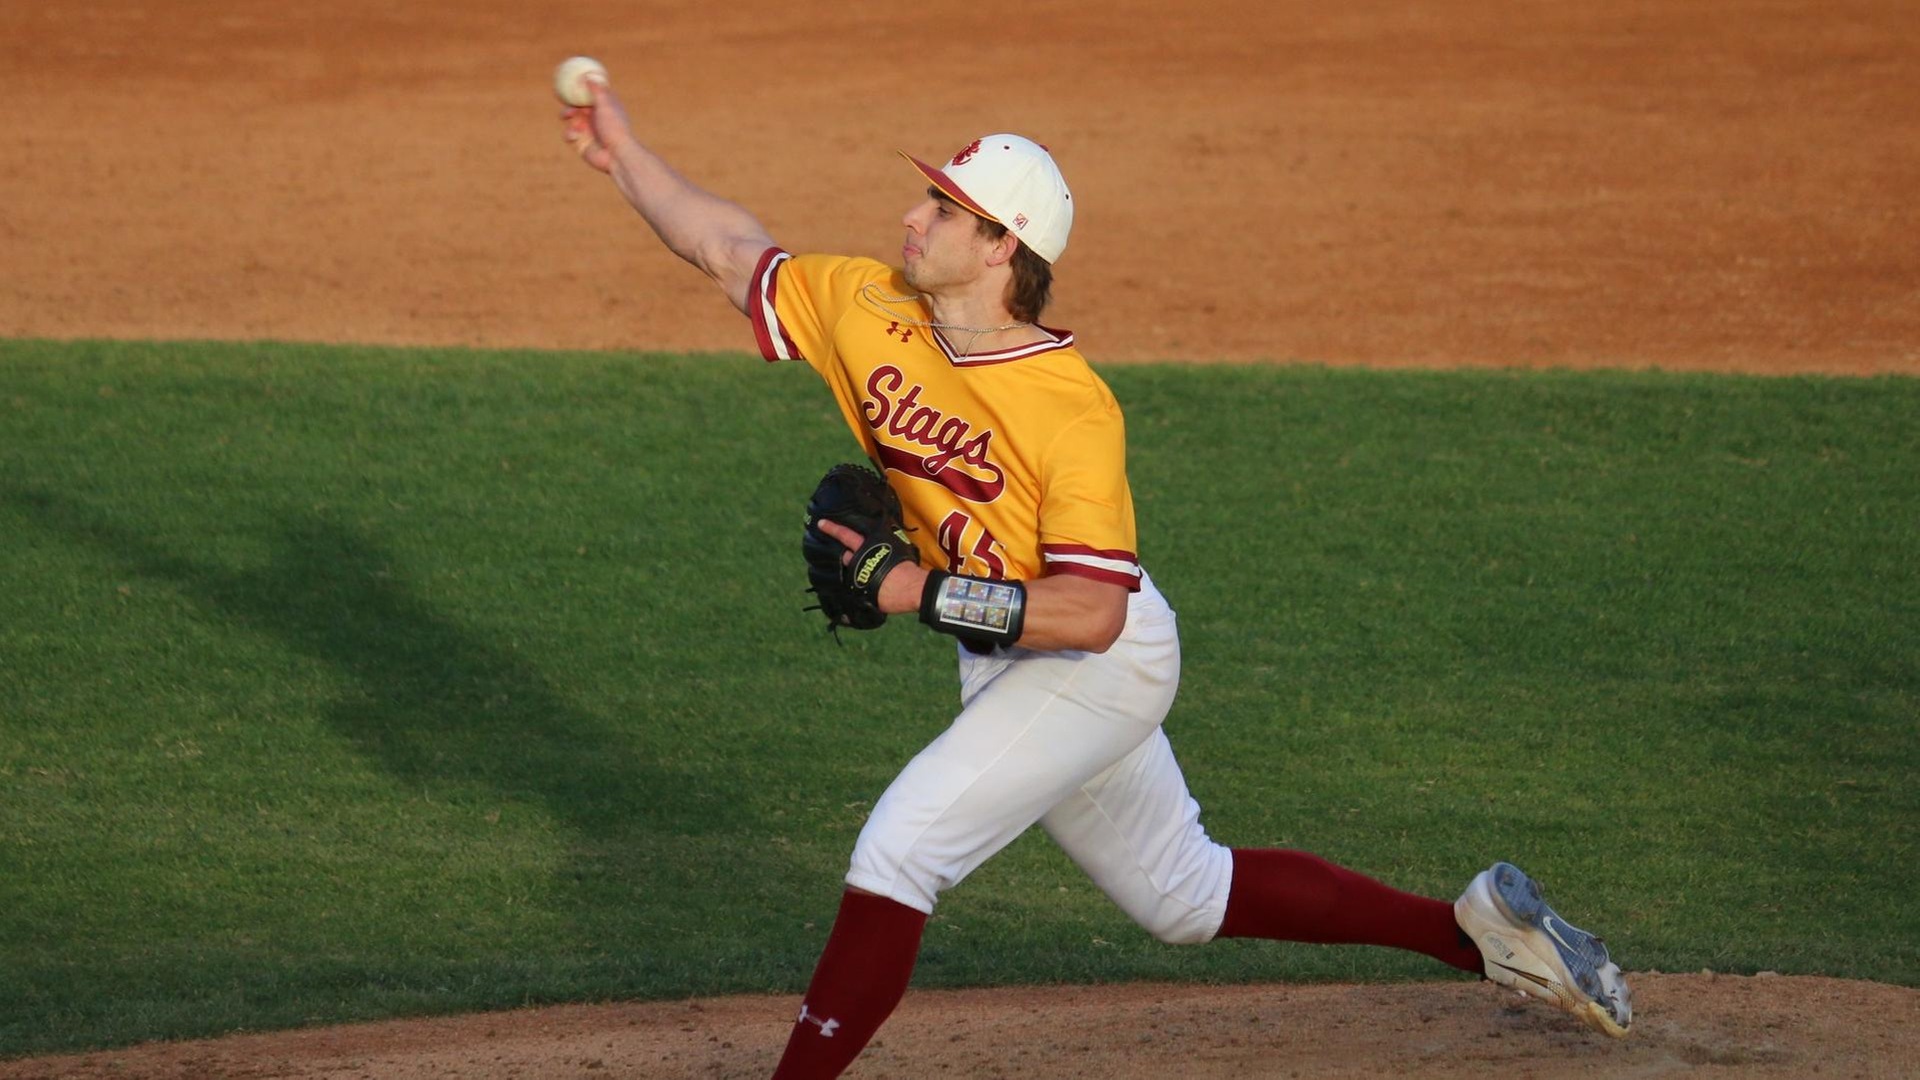 Lucas Welch struck out three batters in two innings to get the save in the opener